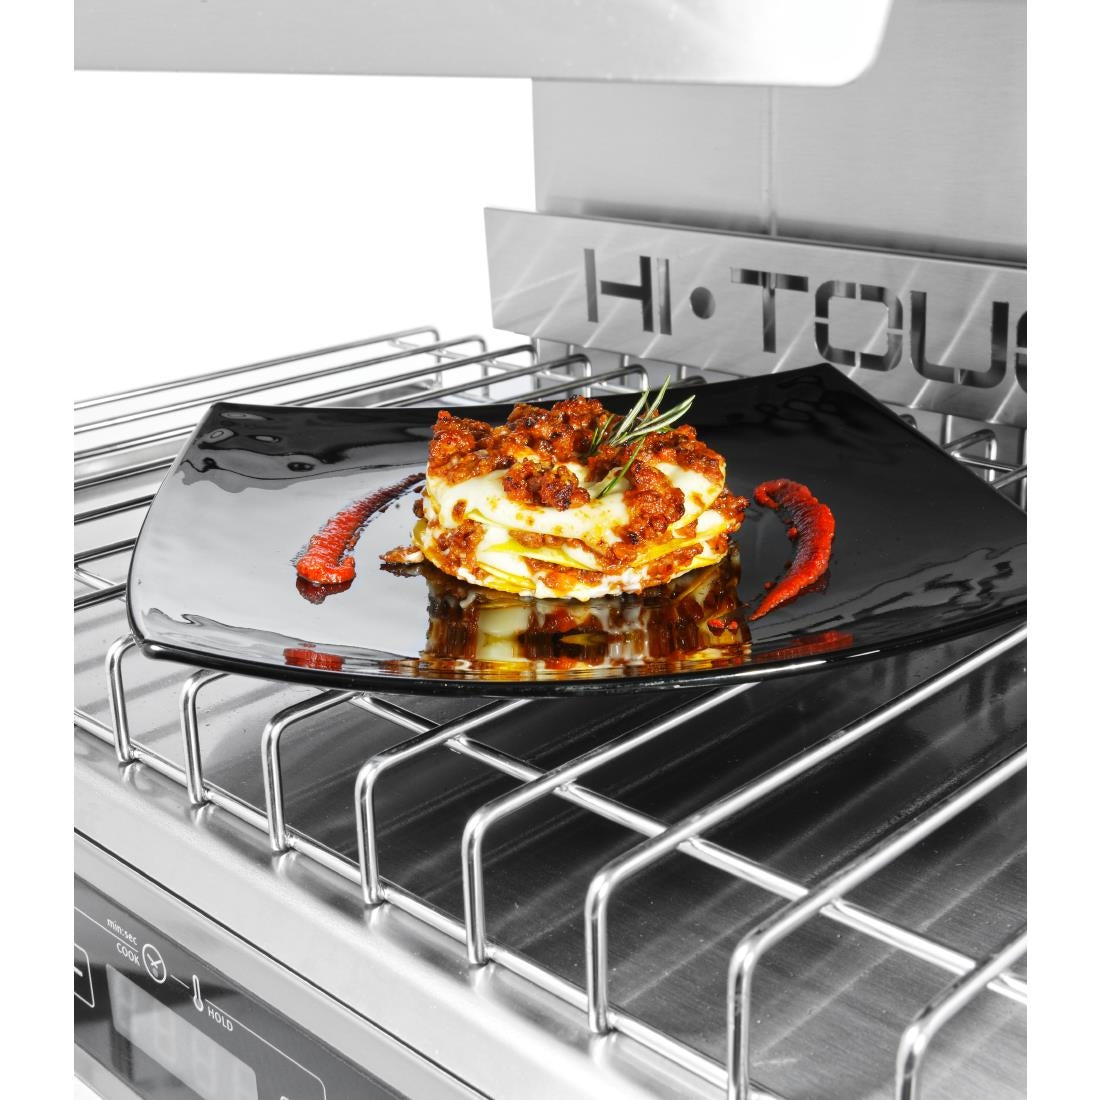 FW879 Giorek Hi Touch Rise and Fall Electric Salamander Grill ST40 3 Phase JD Catering Equipment Solutions Ltd